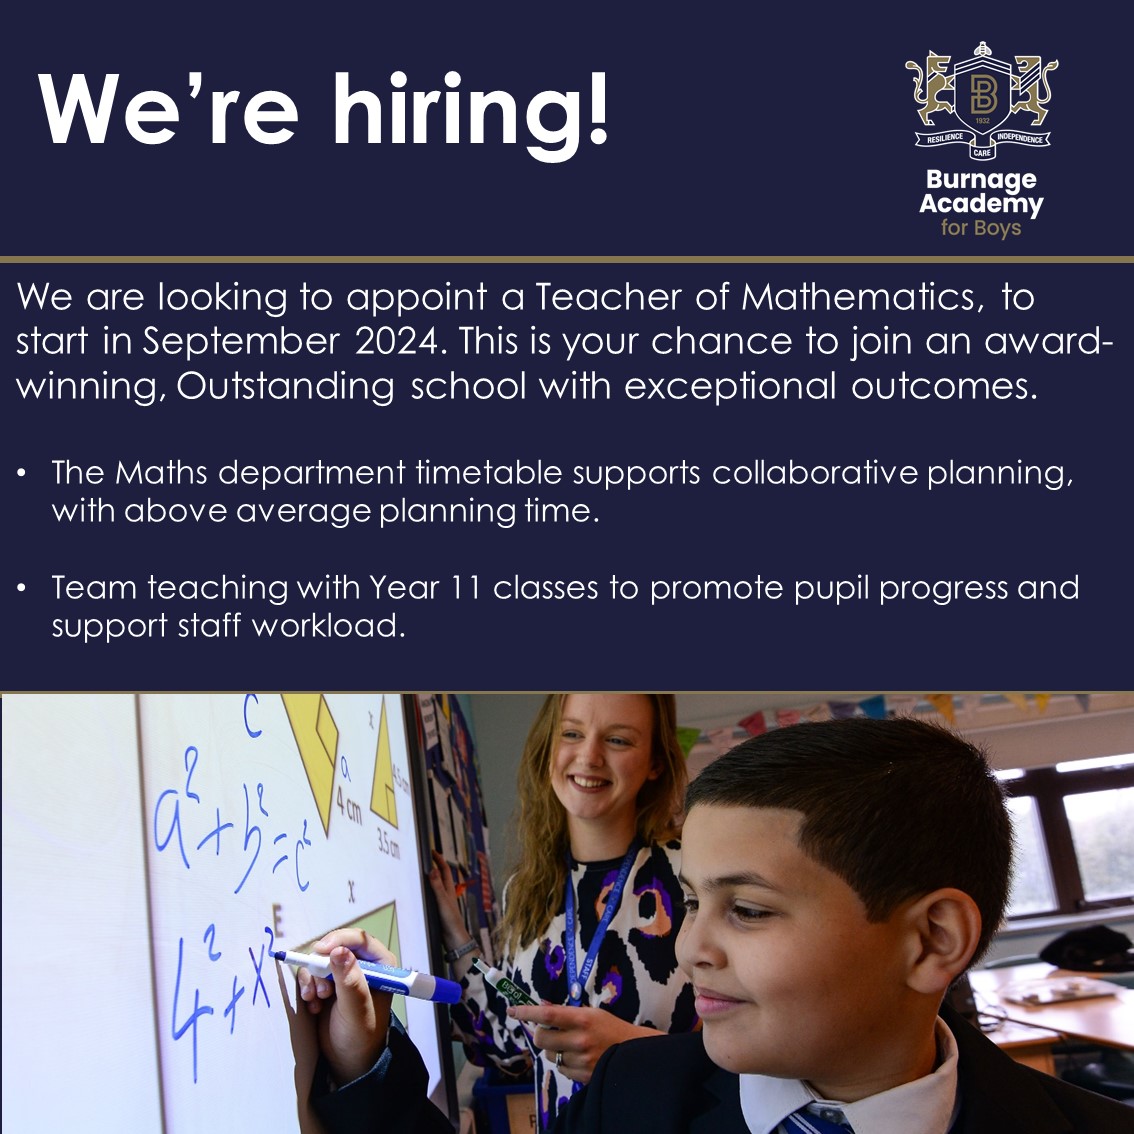 We're looking to appoint a Teacher of Mathematics for Sept 2024, with MPS/UPS applications considered. Join our team where teacher wellbeing is at the heart of all we do and outcomes are exceptional. Applications close Weds 1 May, 9am. Details here: ow.ly/9Erl50RocIJ